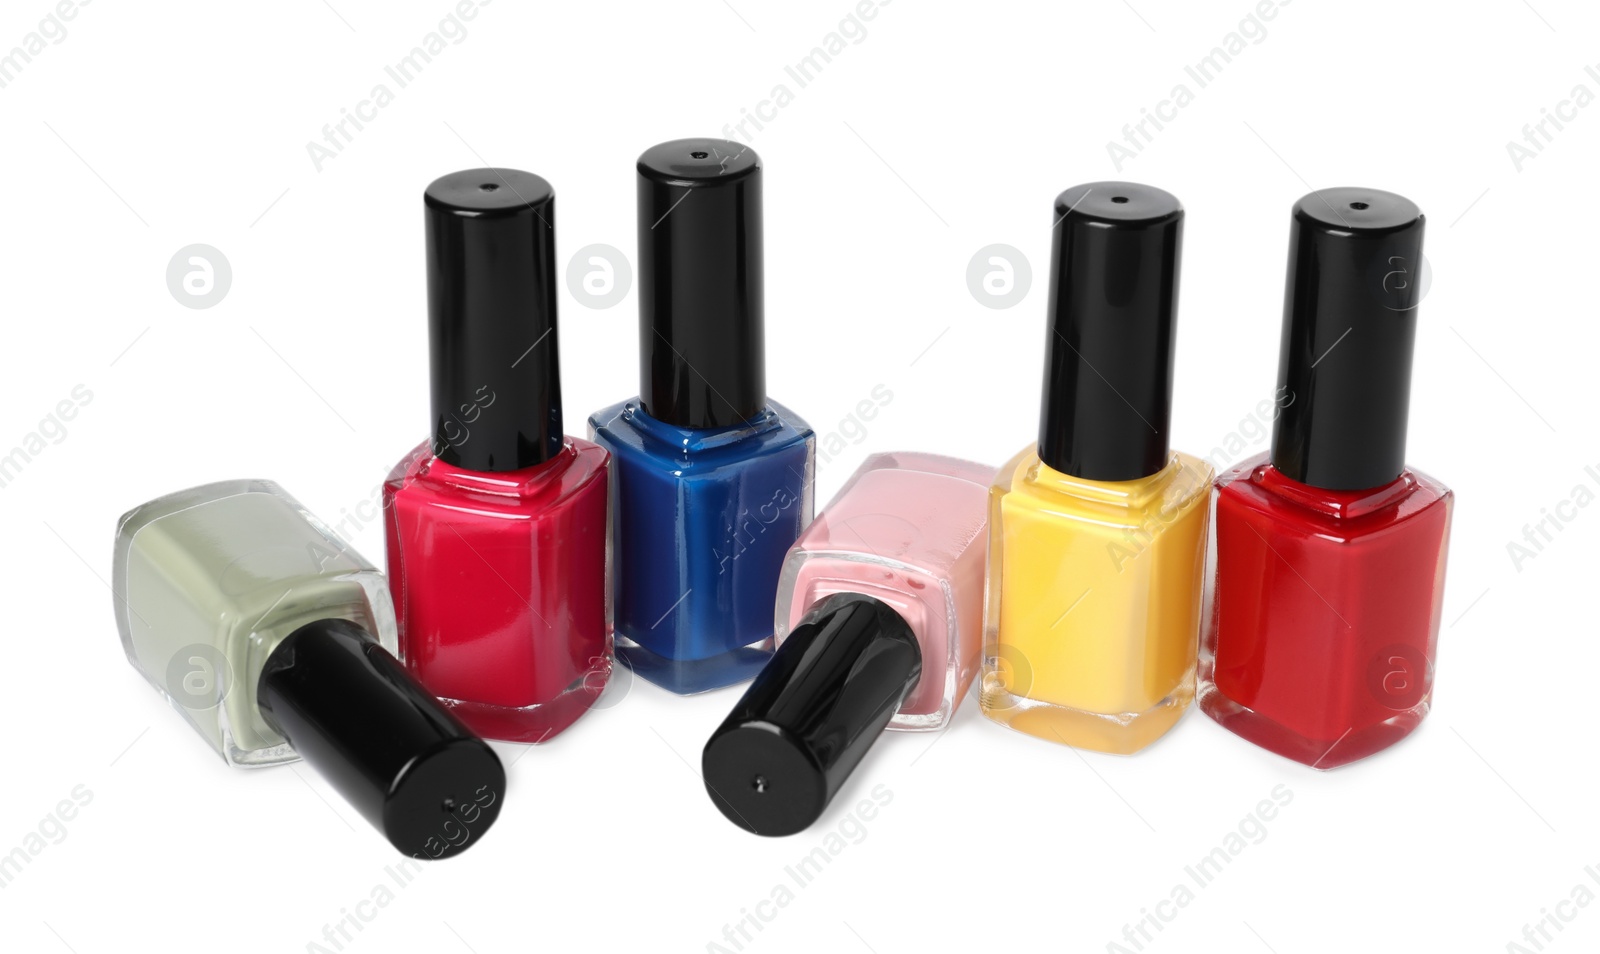 Photo of Bright nail polishes in bottles isolated on white